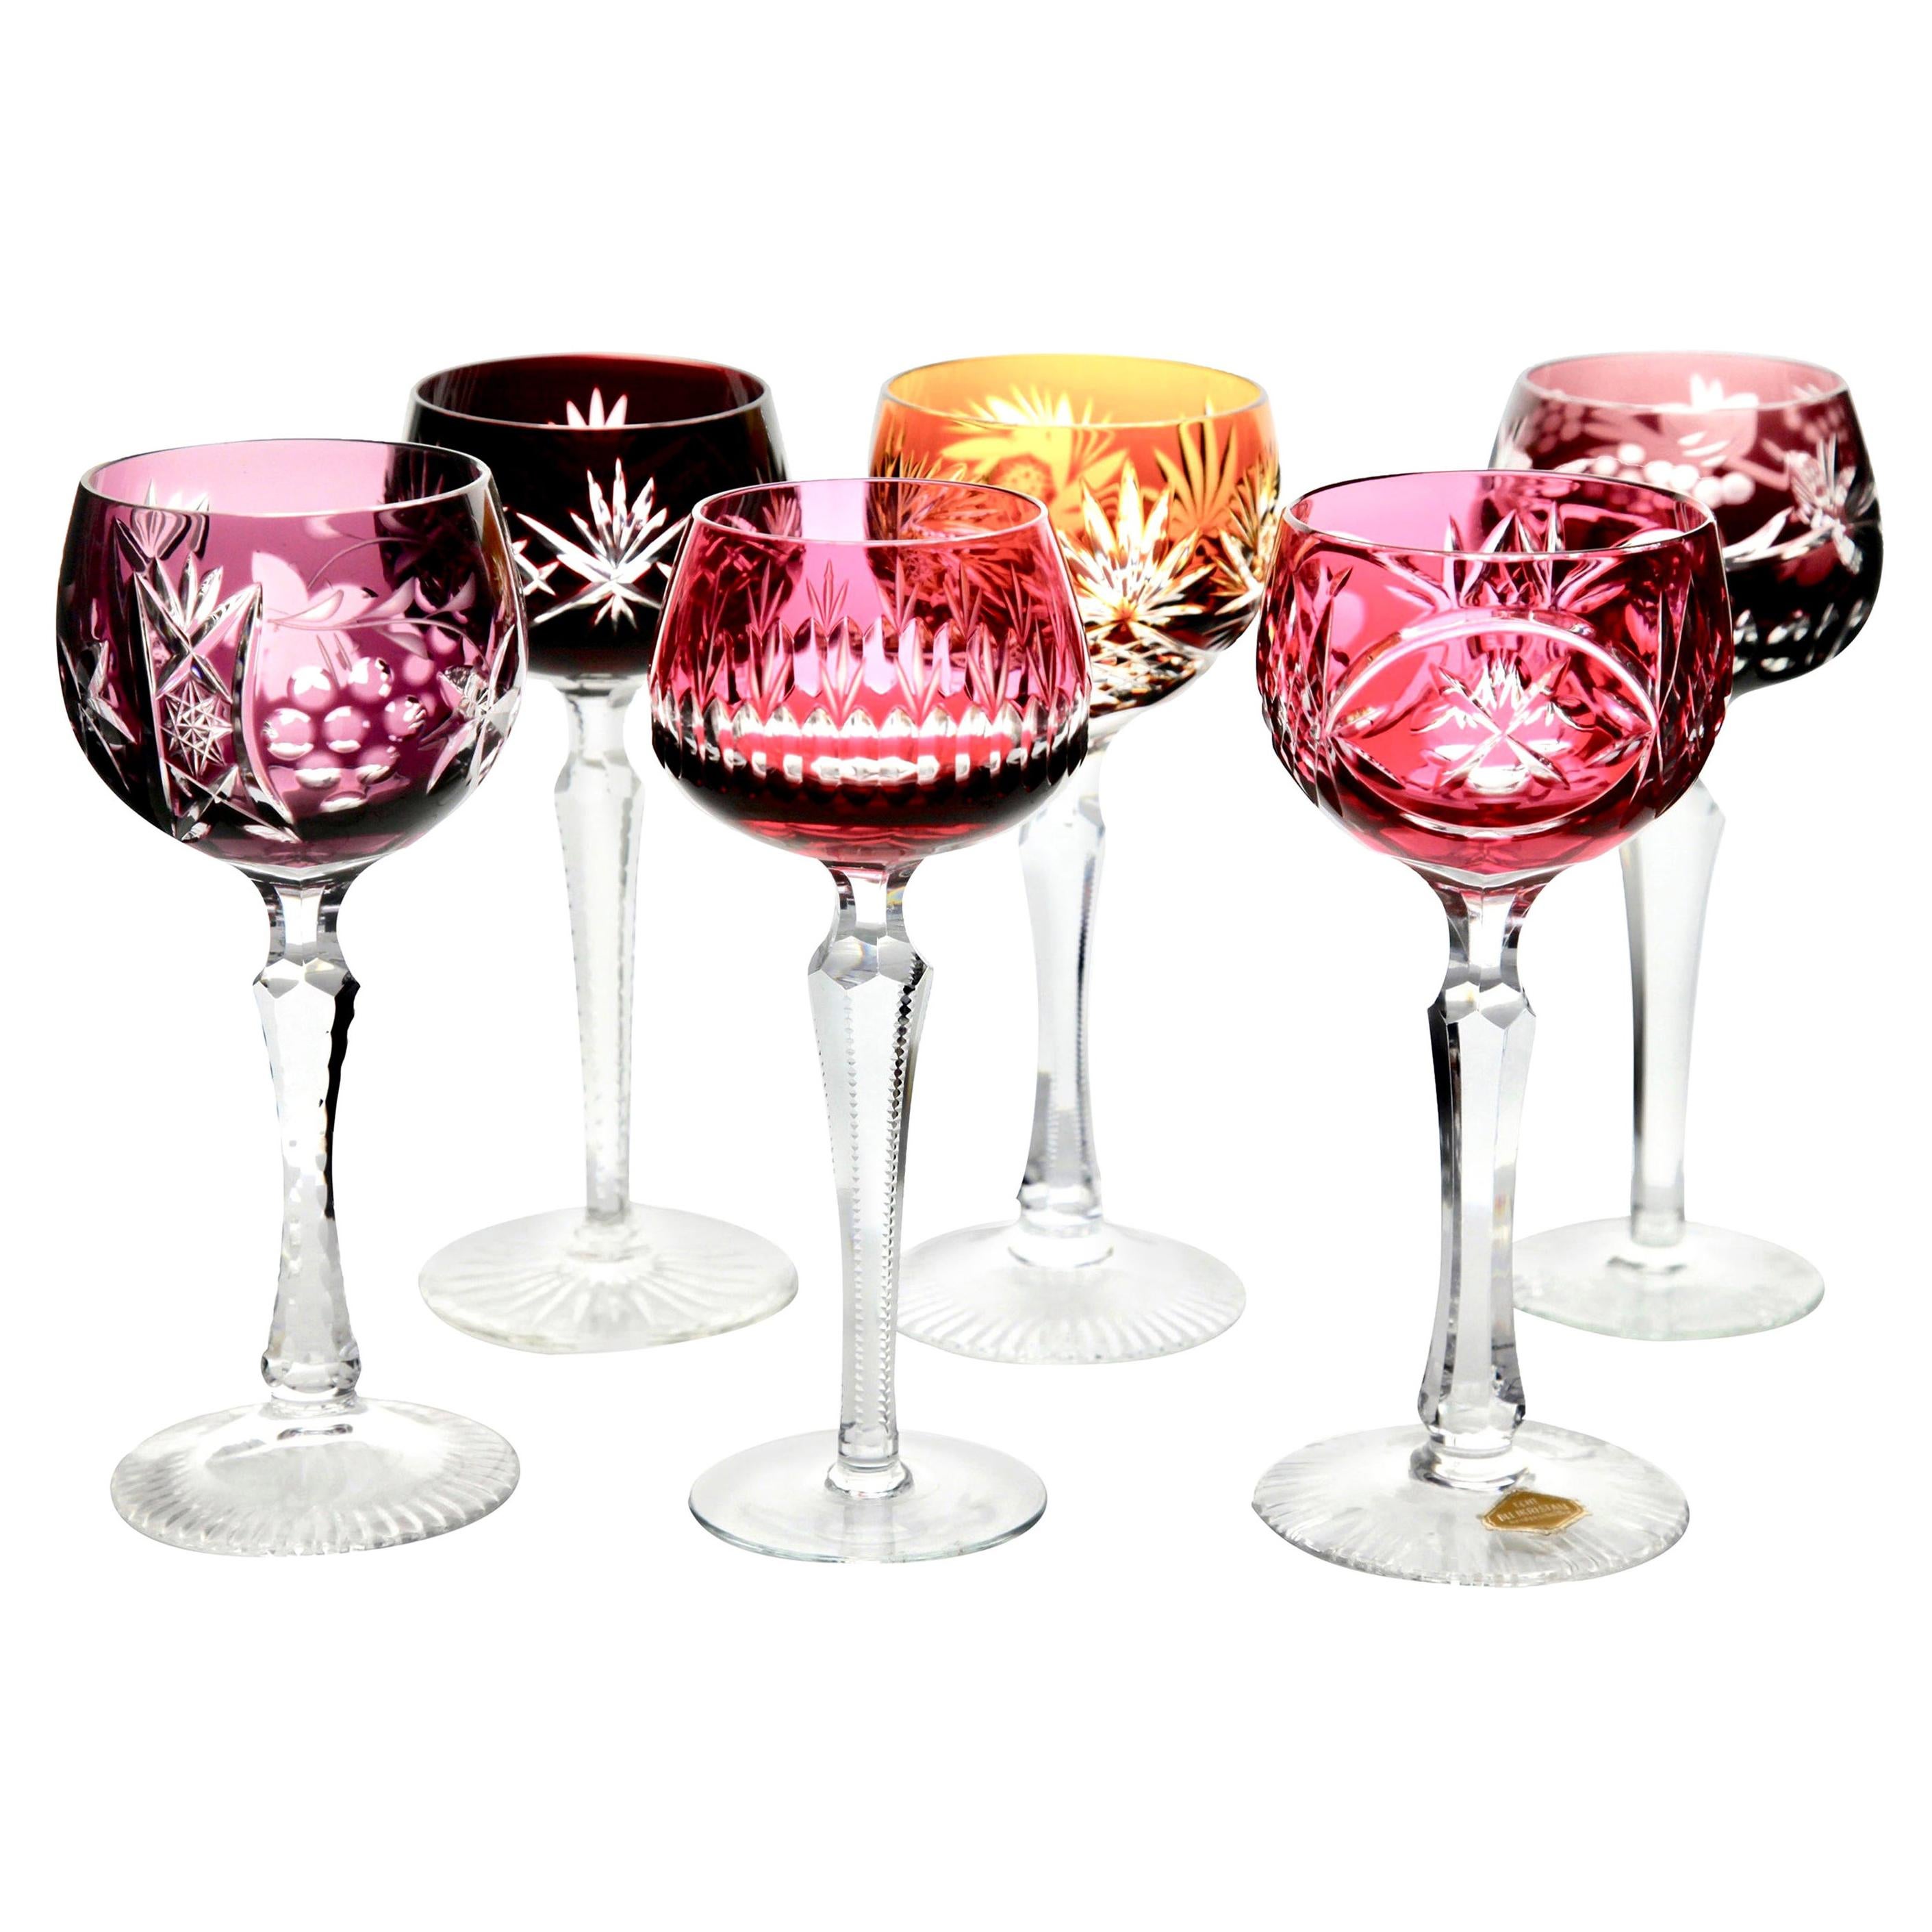 https://a.1stdibscdn.com/crystal-mix-set-of-6-nachtmann-stem-glasses-with-colored-overlay-cut-to-clear-for-sale/1121189/f_242576421624463077492/24257642_master.jpg